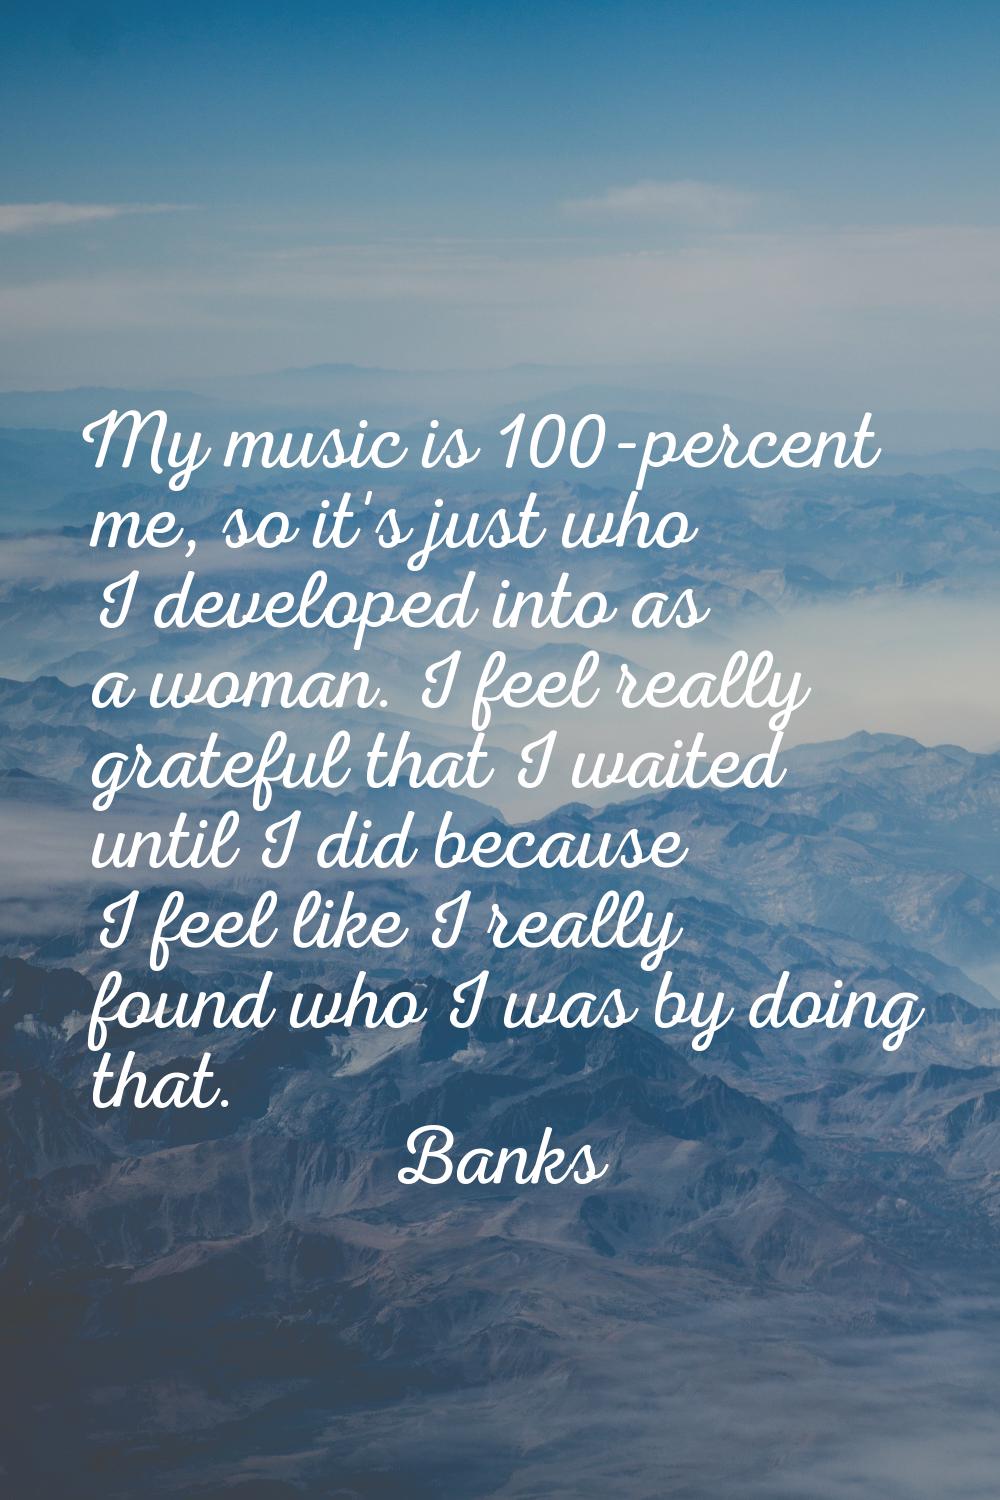 My music is 100-percent me, so it's just who I developed into as a woman. I feel really grateful th